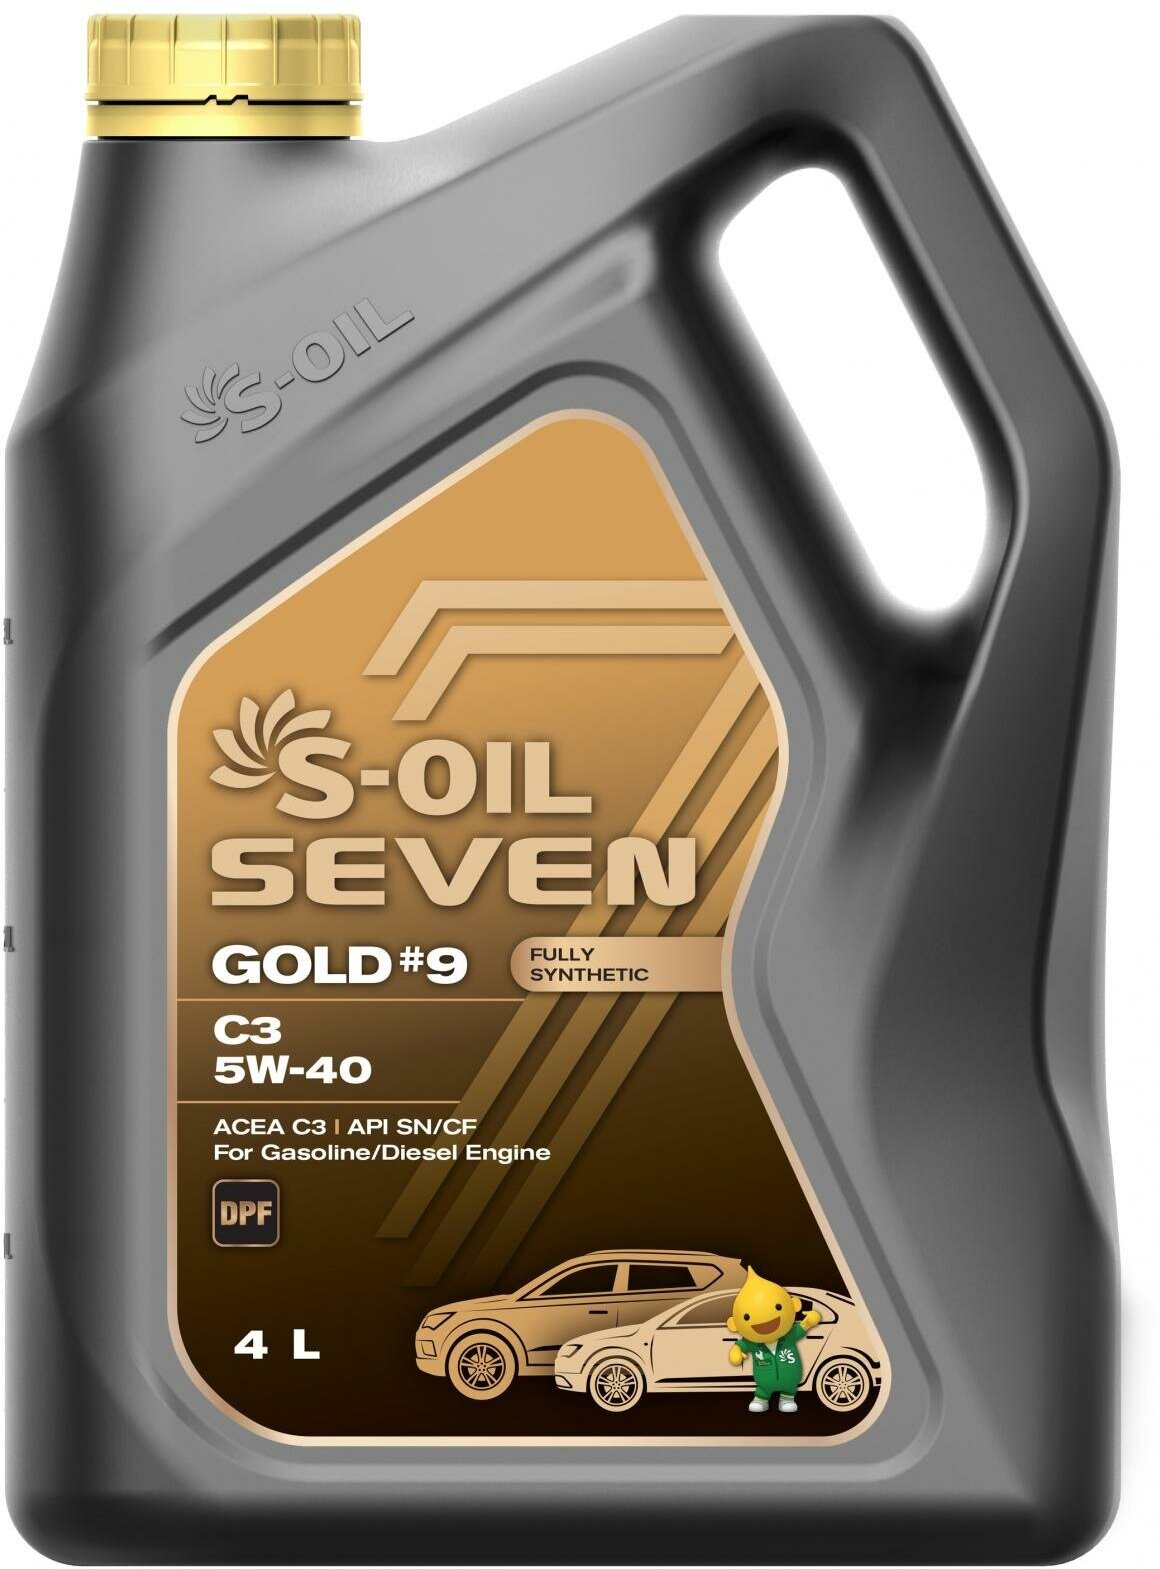 S-OIL 7 GOLD #9 C3 5W-40 4 л Масло моторное